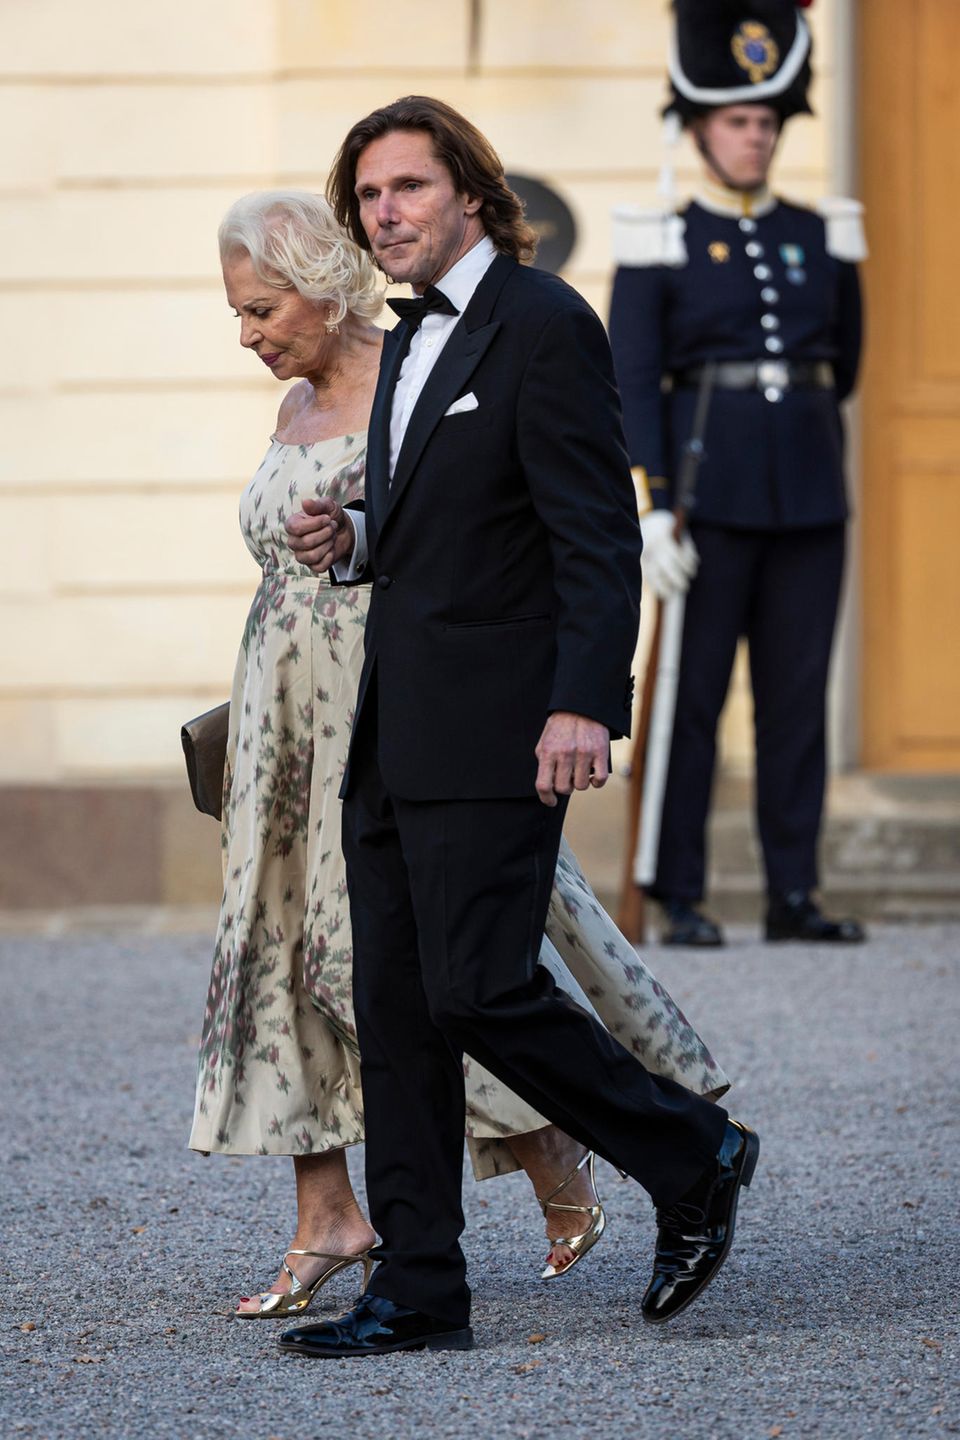 Eva O'Neill and Patrick Sommerlath strolled side by side to the Drottningholm Palace Theater.